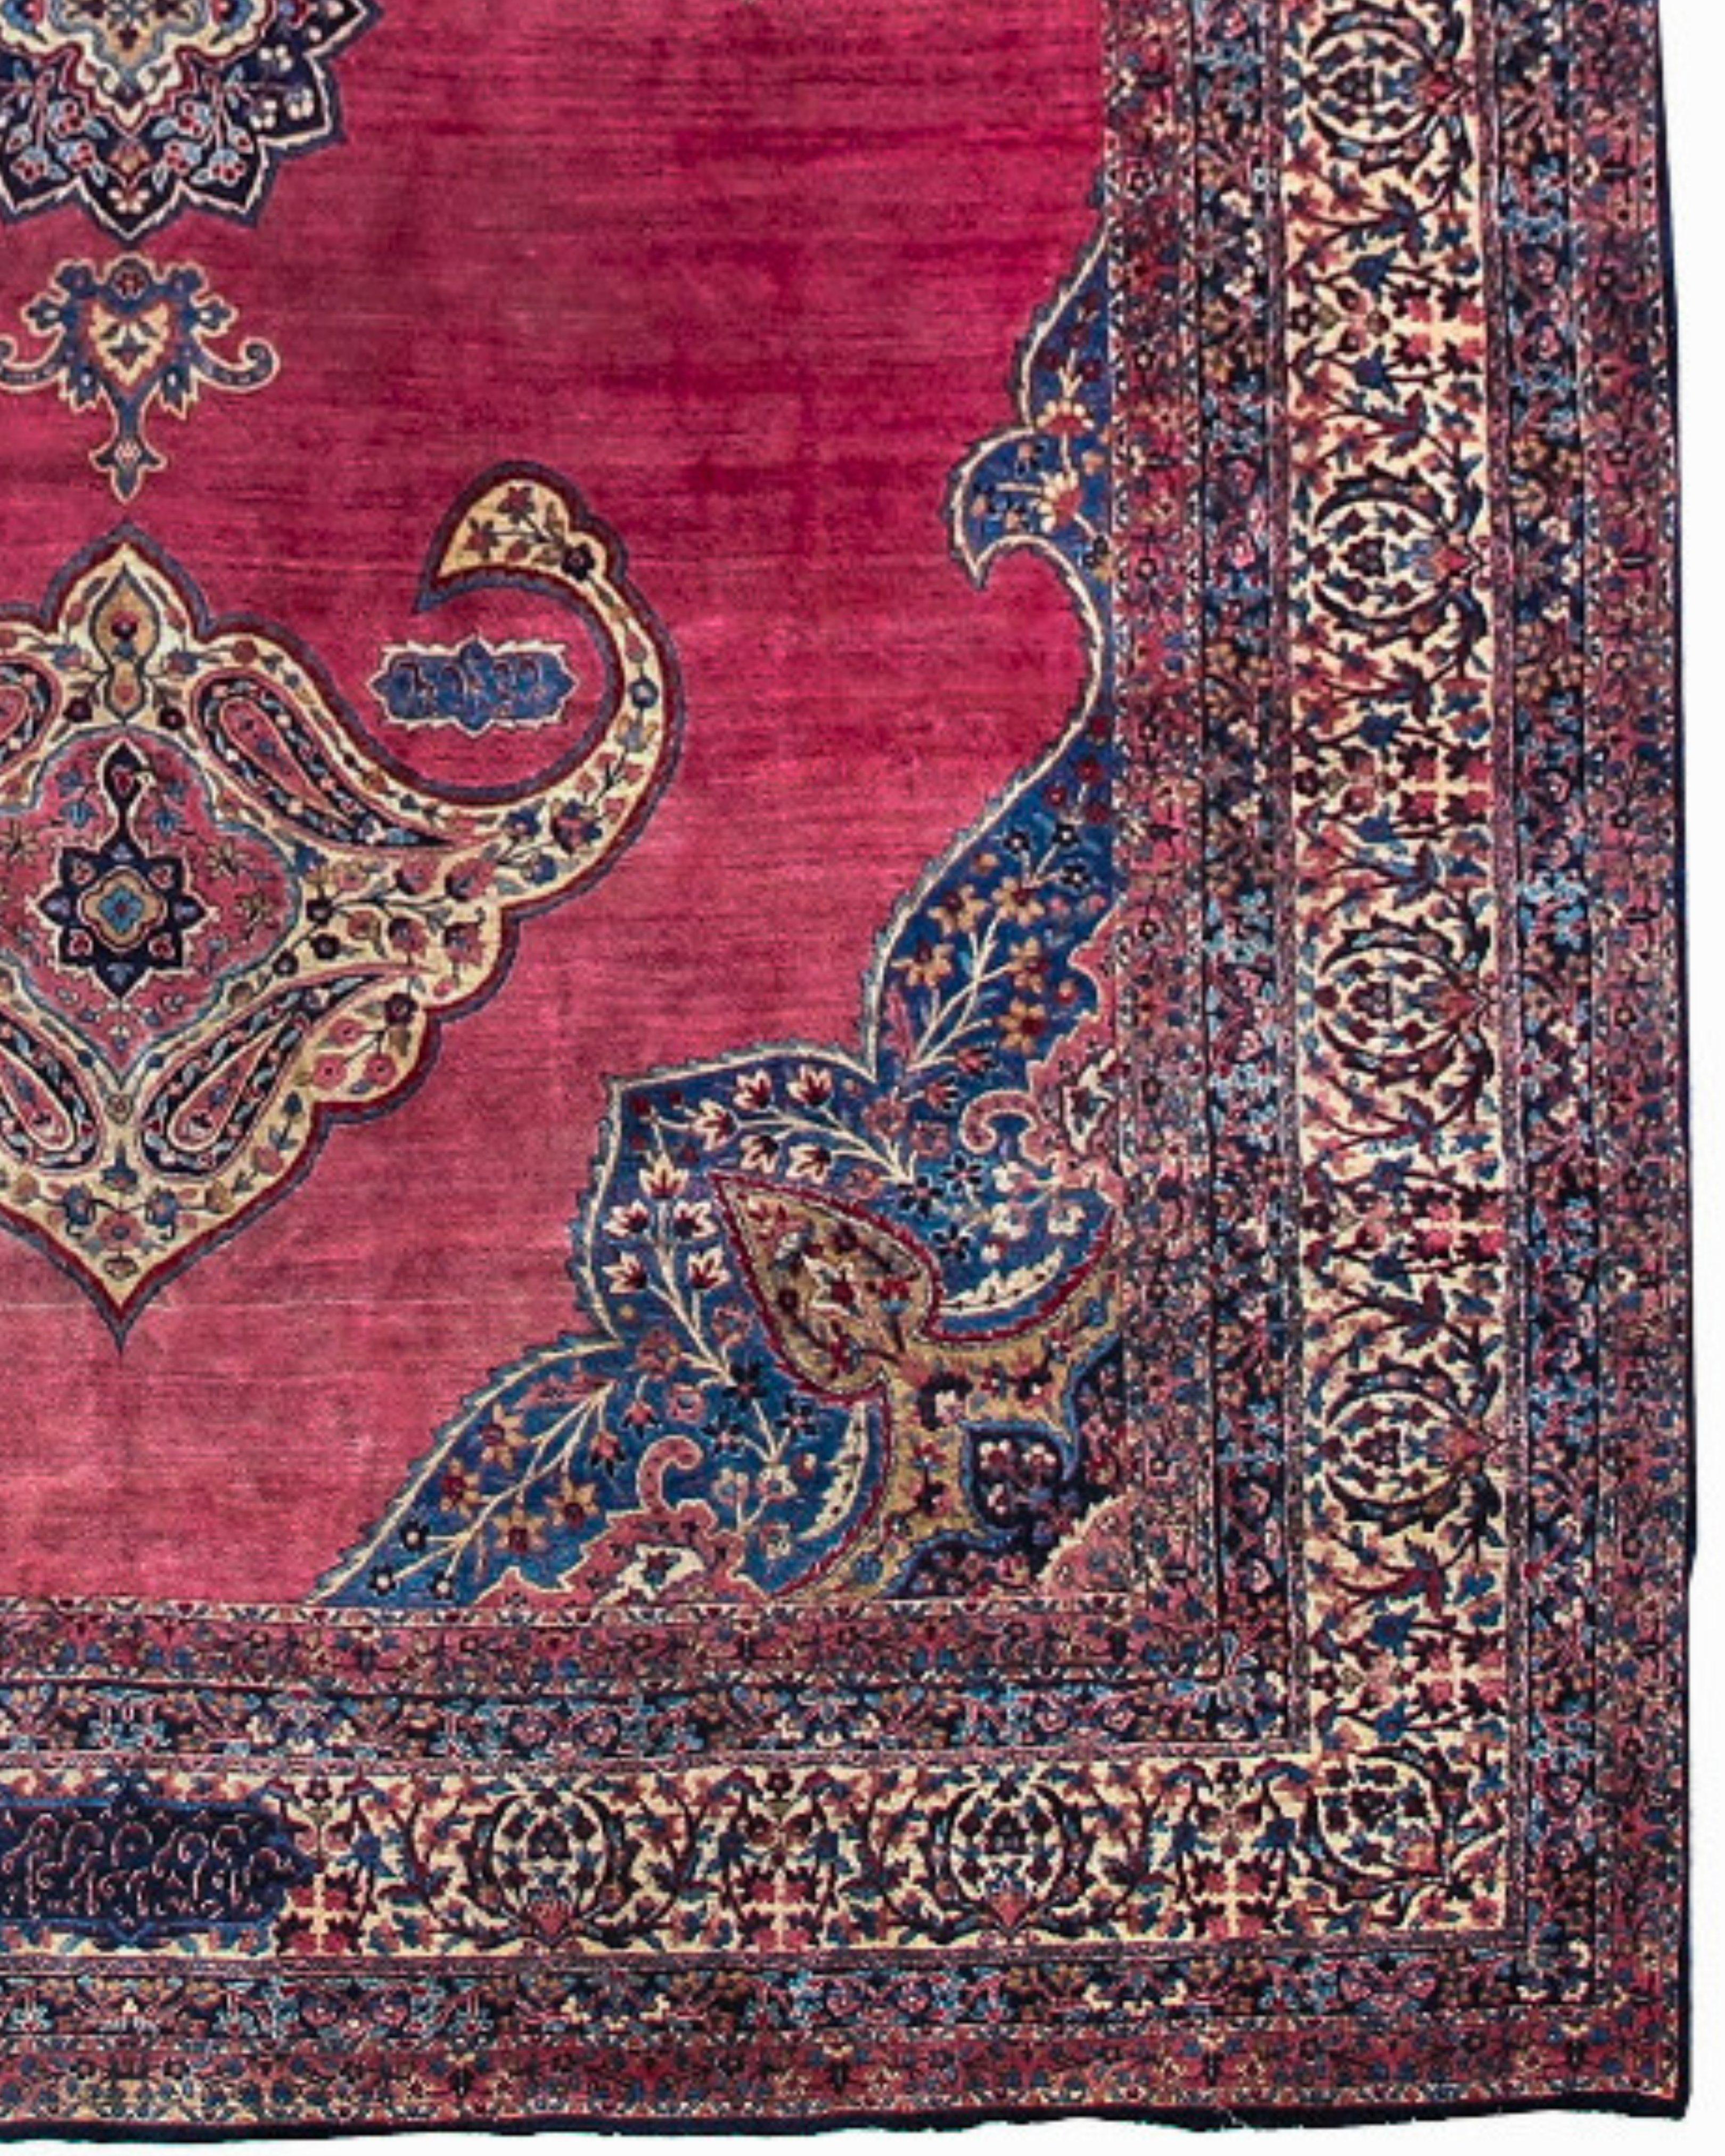 Wool Antique Persian Oversized Kirman Rug, Early 20th Century For Sale